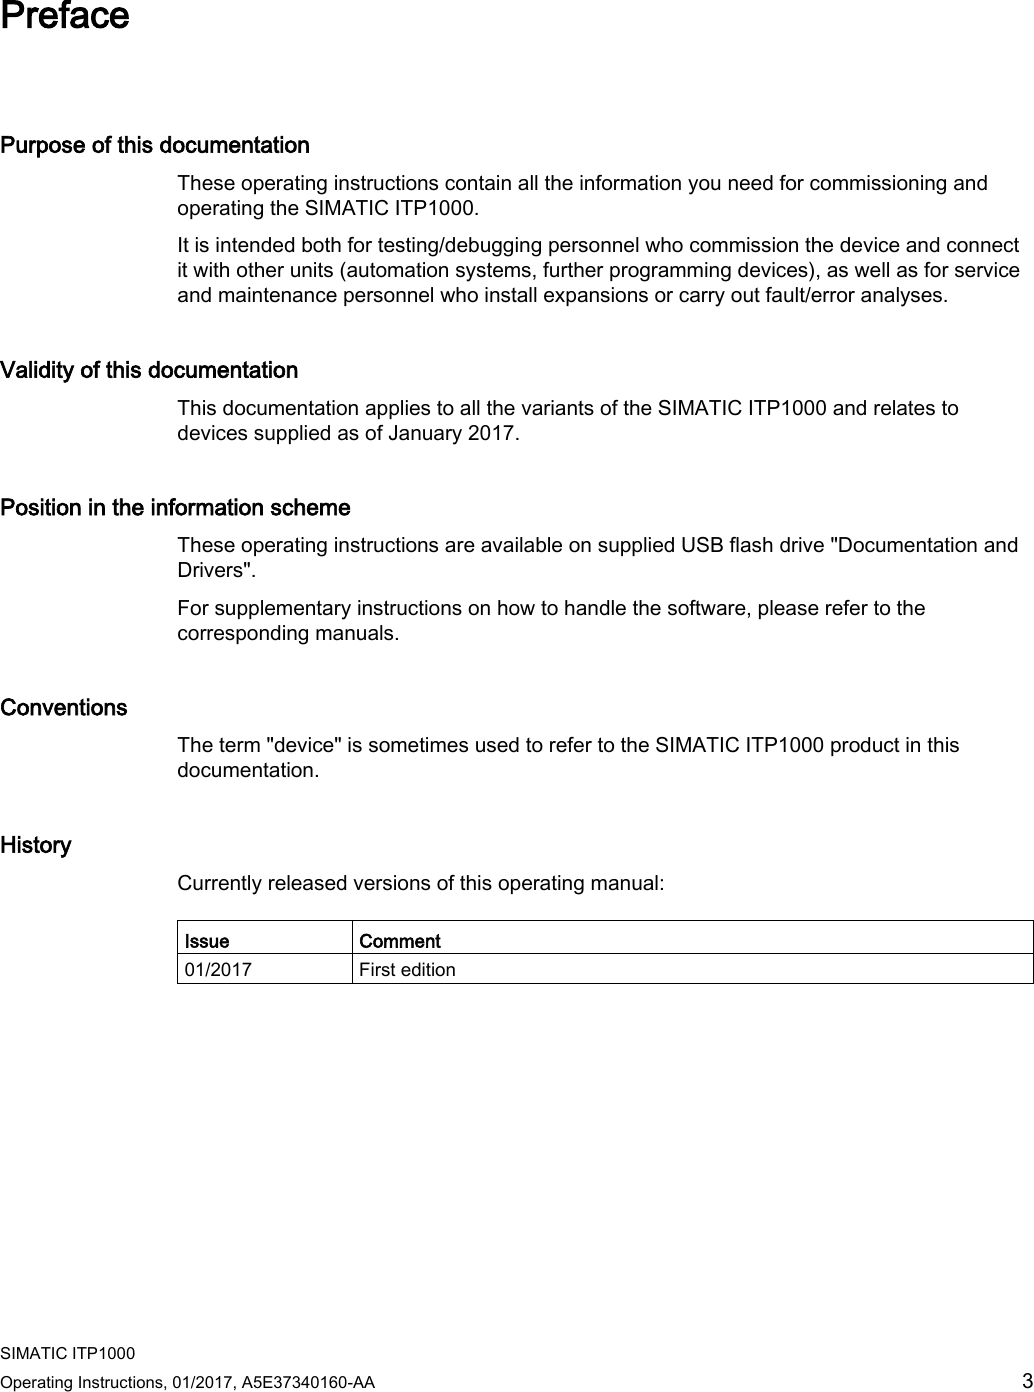  SIMATIC ITP1000 Operating Instructions, 01/2017, A5E37340160-AA  3 Preface   Purpose of this documentation These operating instructions contain all the information you need for commissioning and operating the SIMATIC ITP1000. It is intended both for testing/debugging personnel who commission the device and connect it with other units (automation systems, further programming devices), as well as for service and maintenance personnel who install expansions or carry out fault/error analyses. Validity of this documentation This documentation applies to all the variants of the SIMATIC ITP1000 and relates to devices supplied as of January 2017. Position in the information scheme These operating instructions are available on supplied USB flash drive &quot;Documentation and Drivers&quot;.  For supplementary instructions on how to handle the software, please refer to the corresponding manuals.  Conventions The term &quot;device&quot; is sometimes used to refer to the SIMATIC ITP1000 product in this documentation.  History Currently released versions of this operating manual:  Issue Comment 01/2017 First edition  